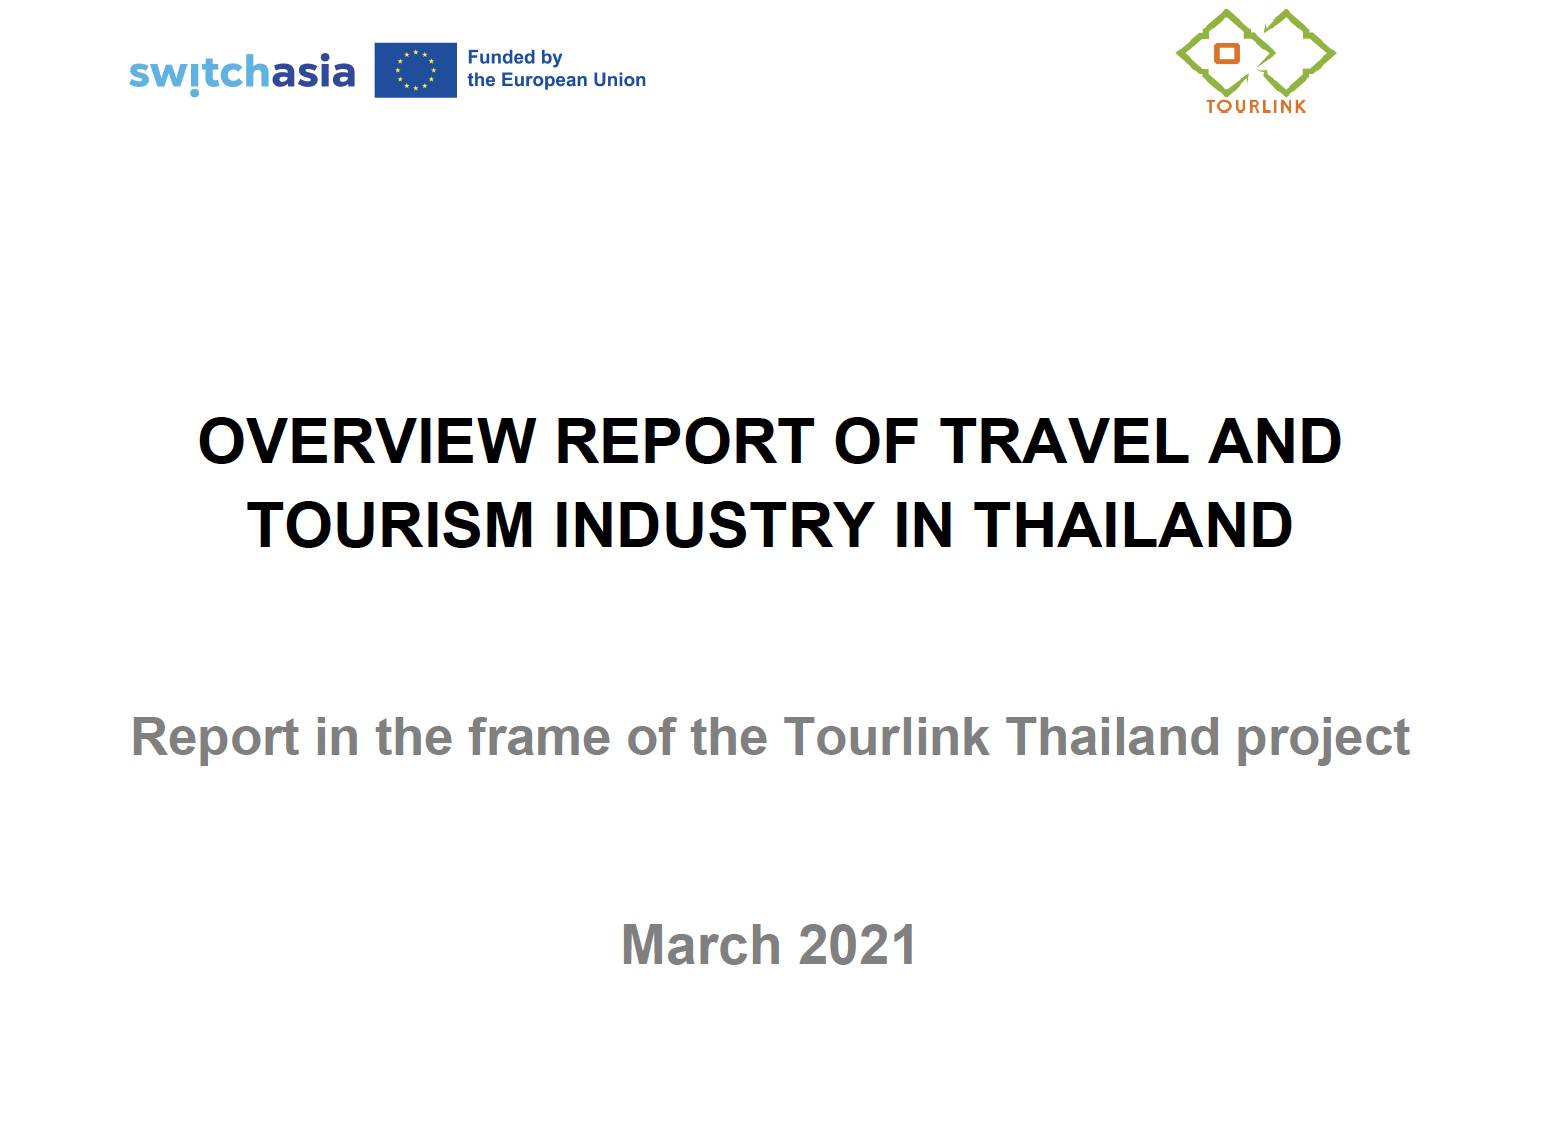 Overview Report of Travel and Tourism Industry in Thailand